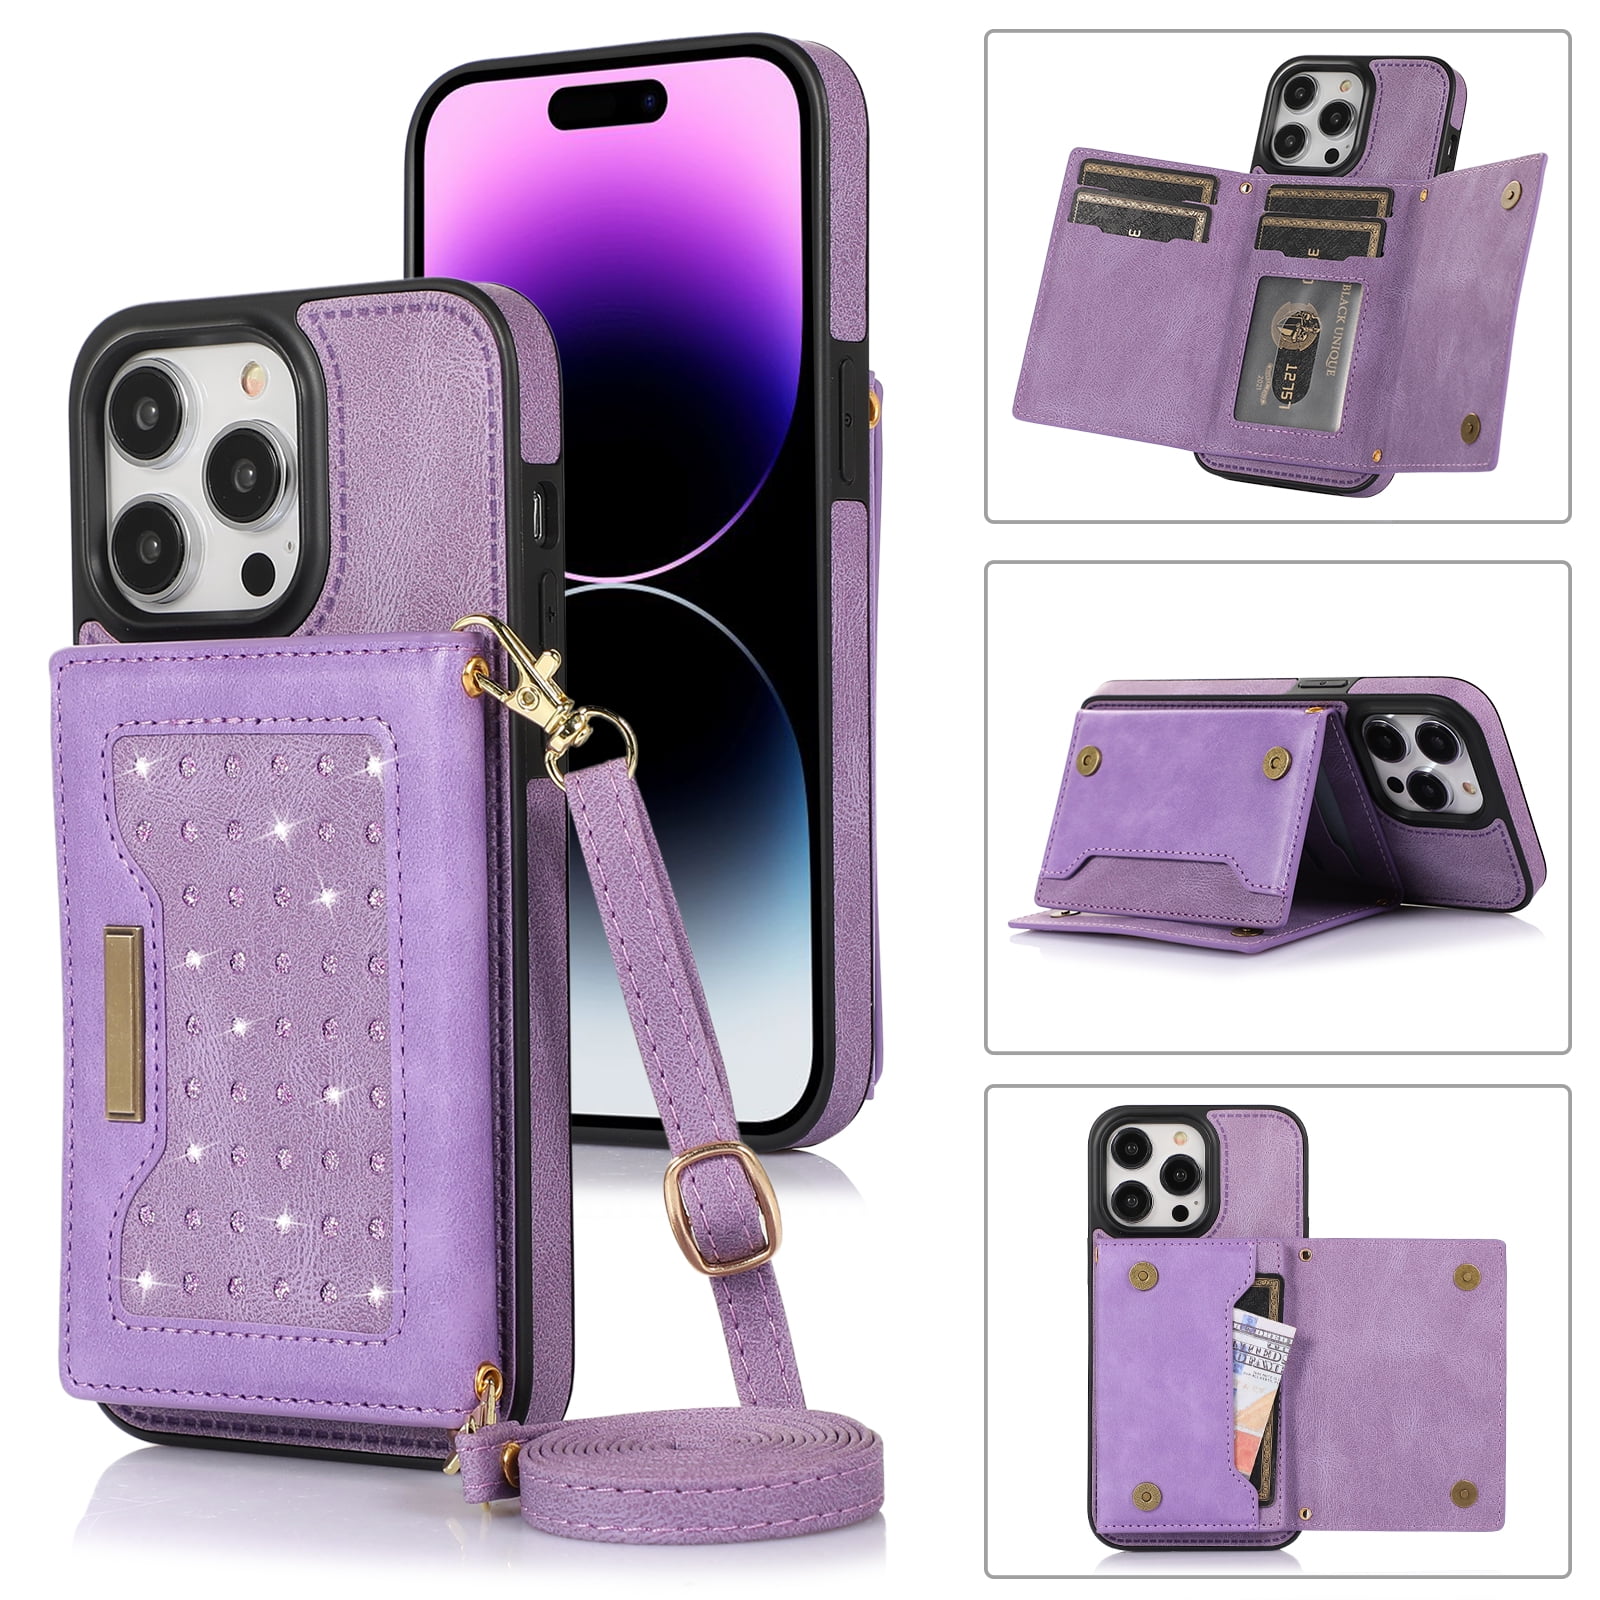 Compatible with iPhone 14 Pro Max 6.7 Inch Wallet Case, PU Leather  Kickstand Card Holder Case,Slim Designer Money Pocket Back Cover Purse Case  for